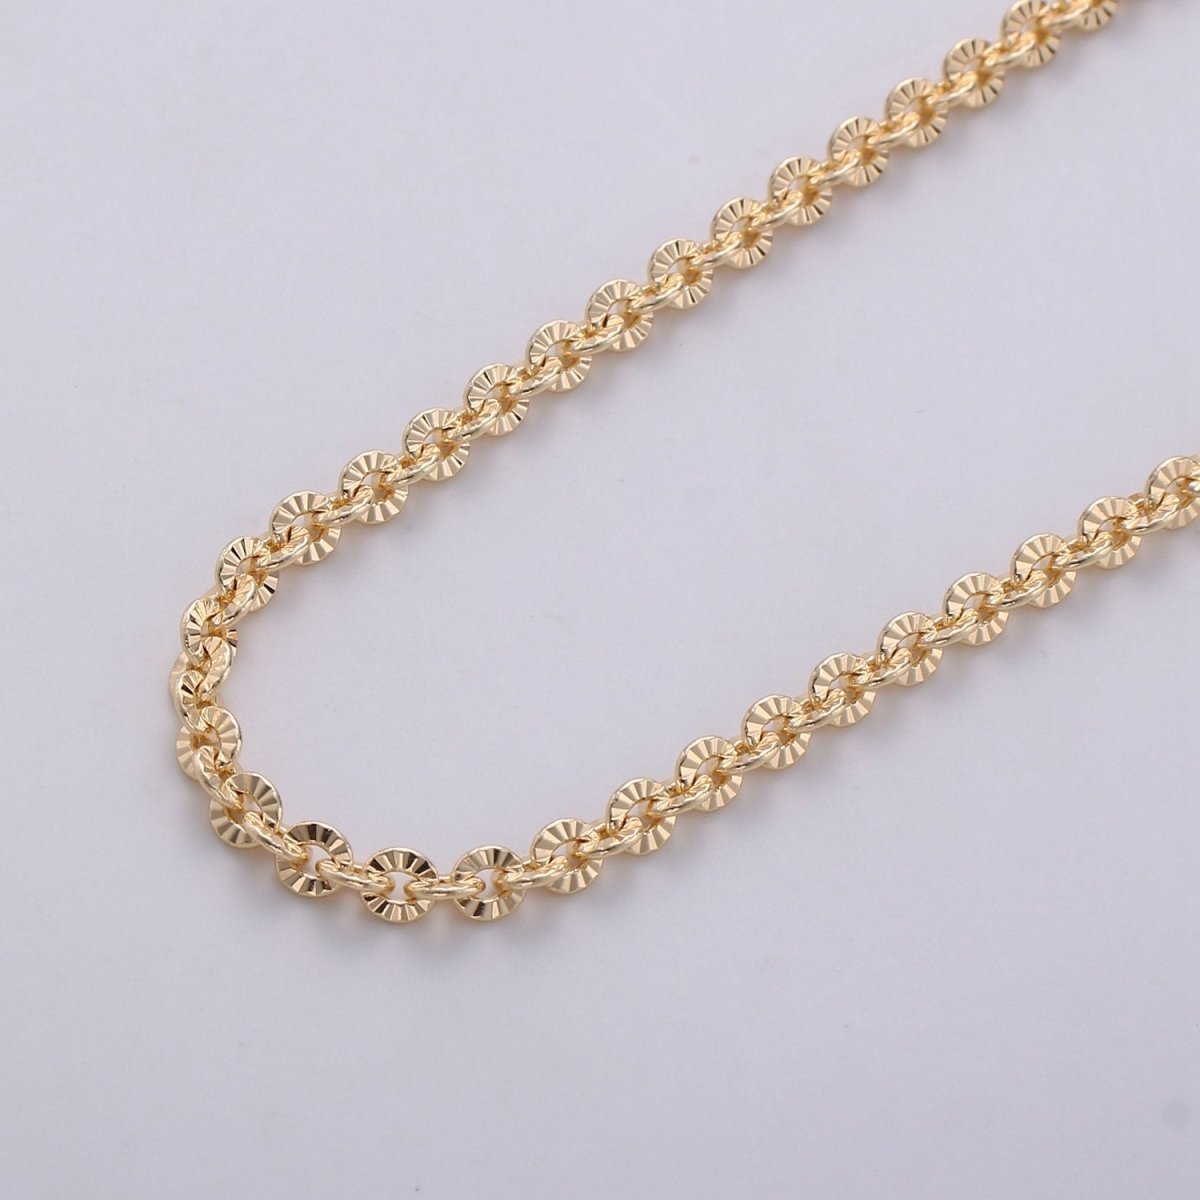 16K Gold Filled Chain, Textured Unique ROLO Unfinished Chain, Width 4mm For Necklace, Bracelet, Anklet, Jewelry Component | ROLL-265 Clearance Pricing - DLUXCA